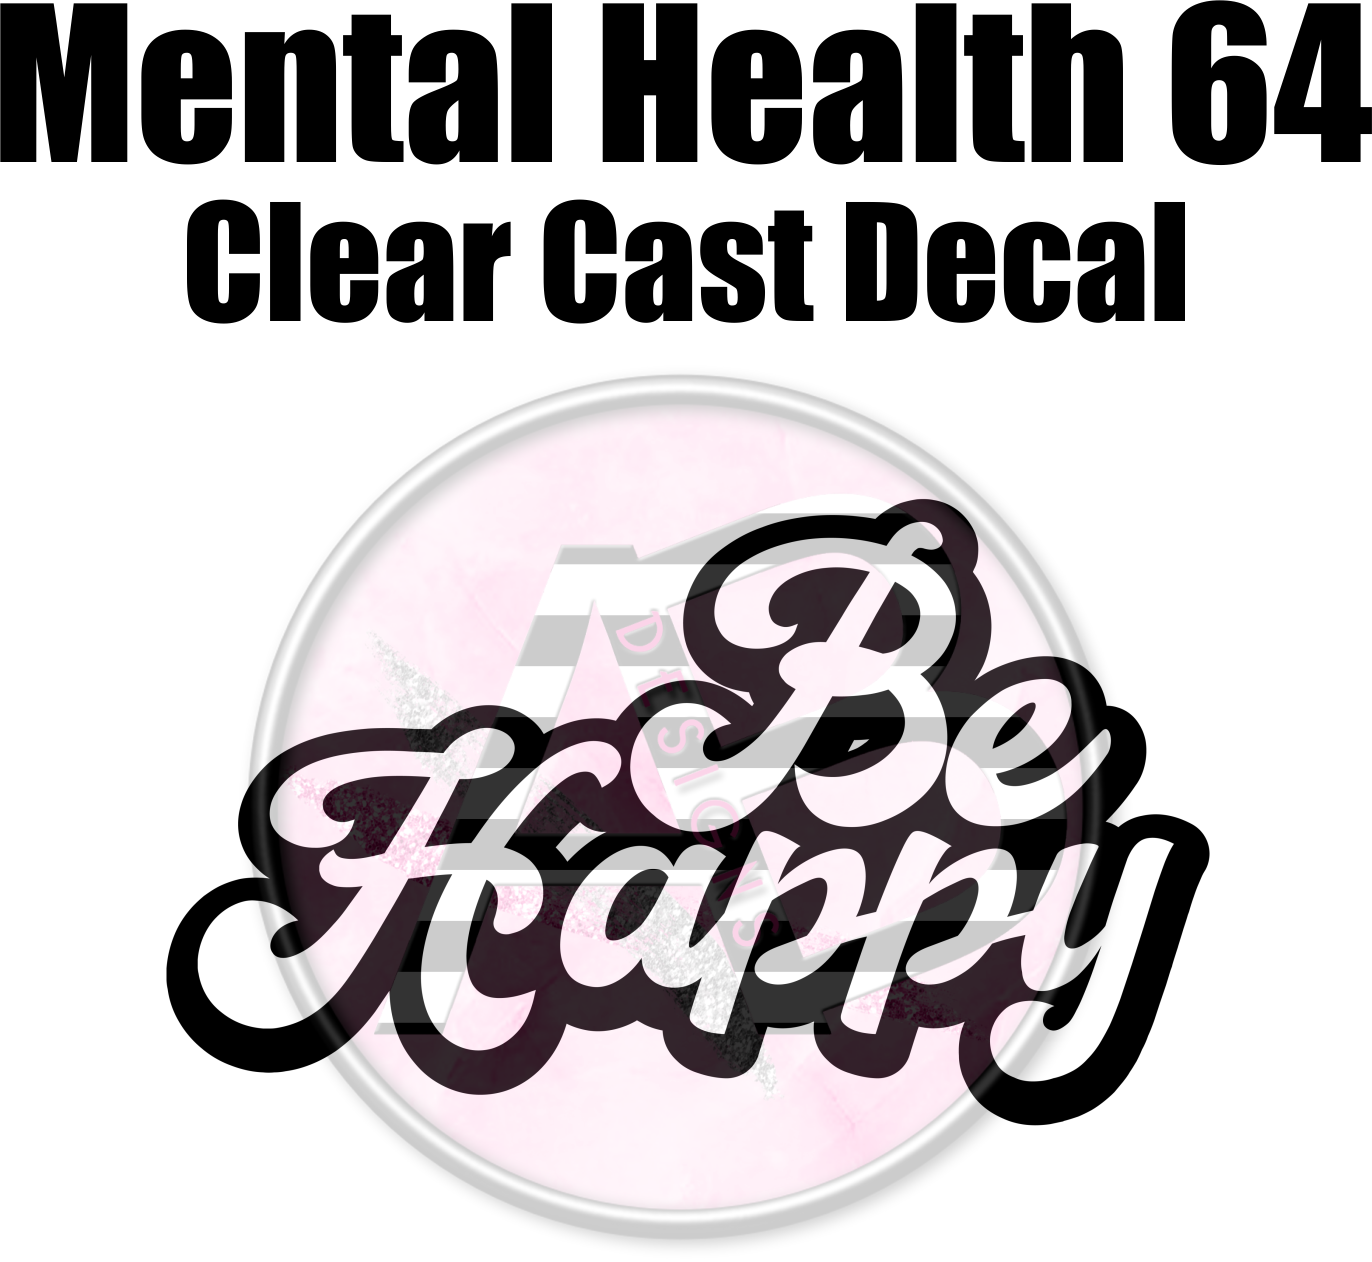 Mental Health 64 - Clear Cast Decal - 357